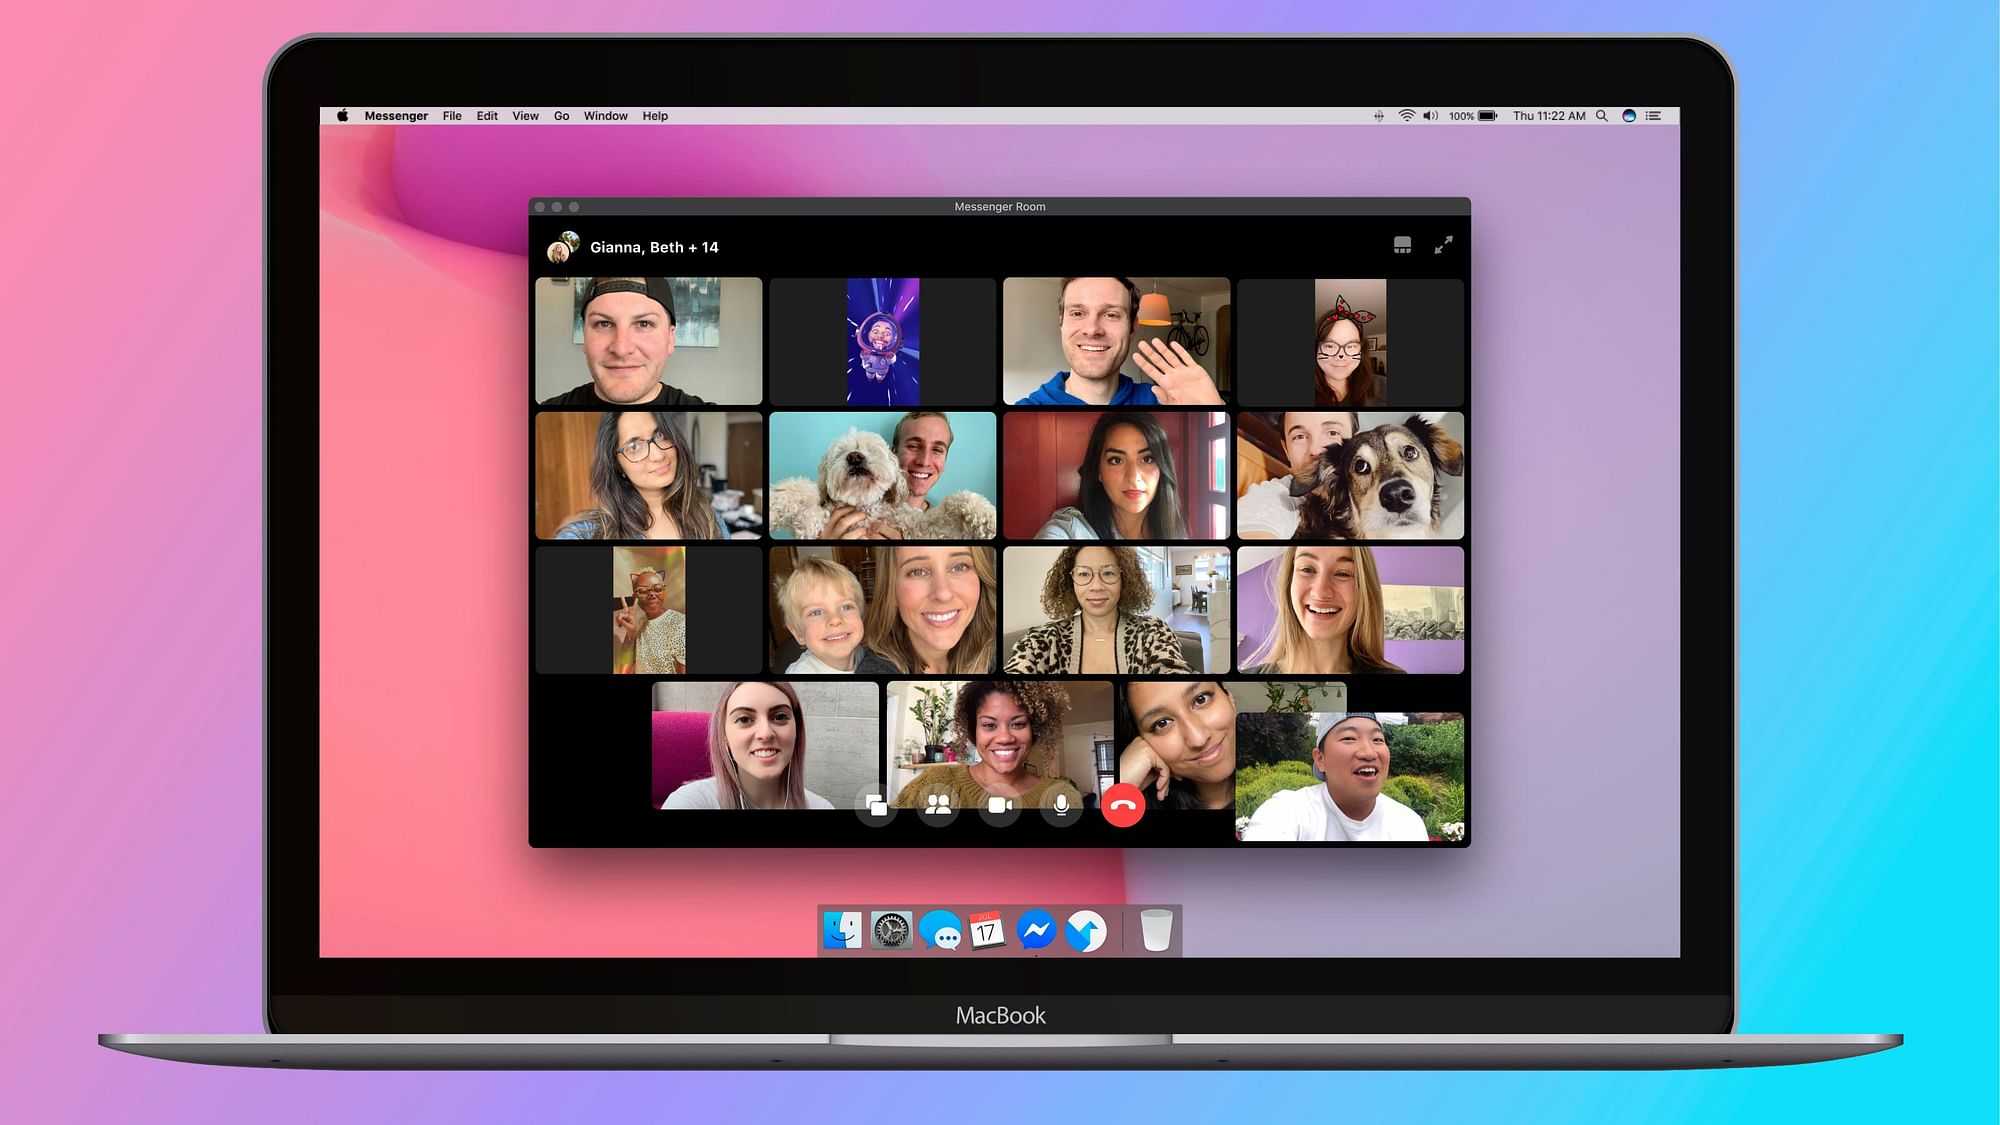 Messenger Rooms allows up to 50 participants in a video call.